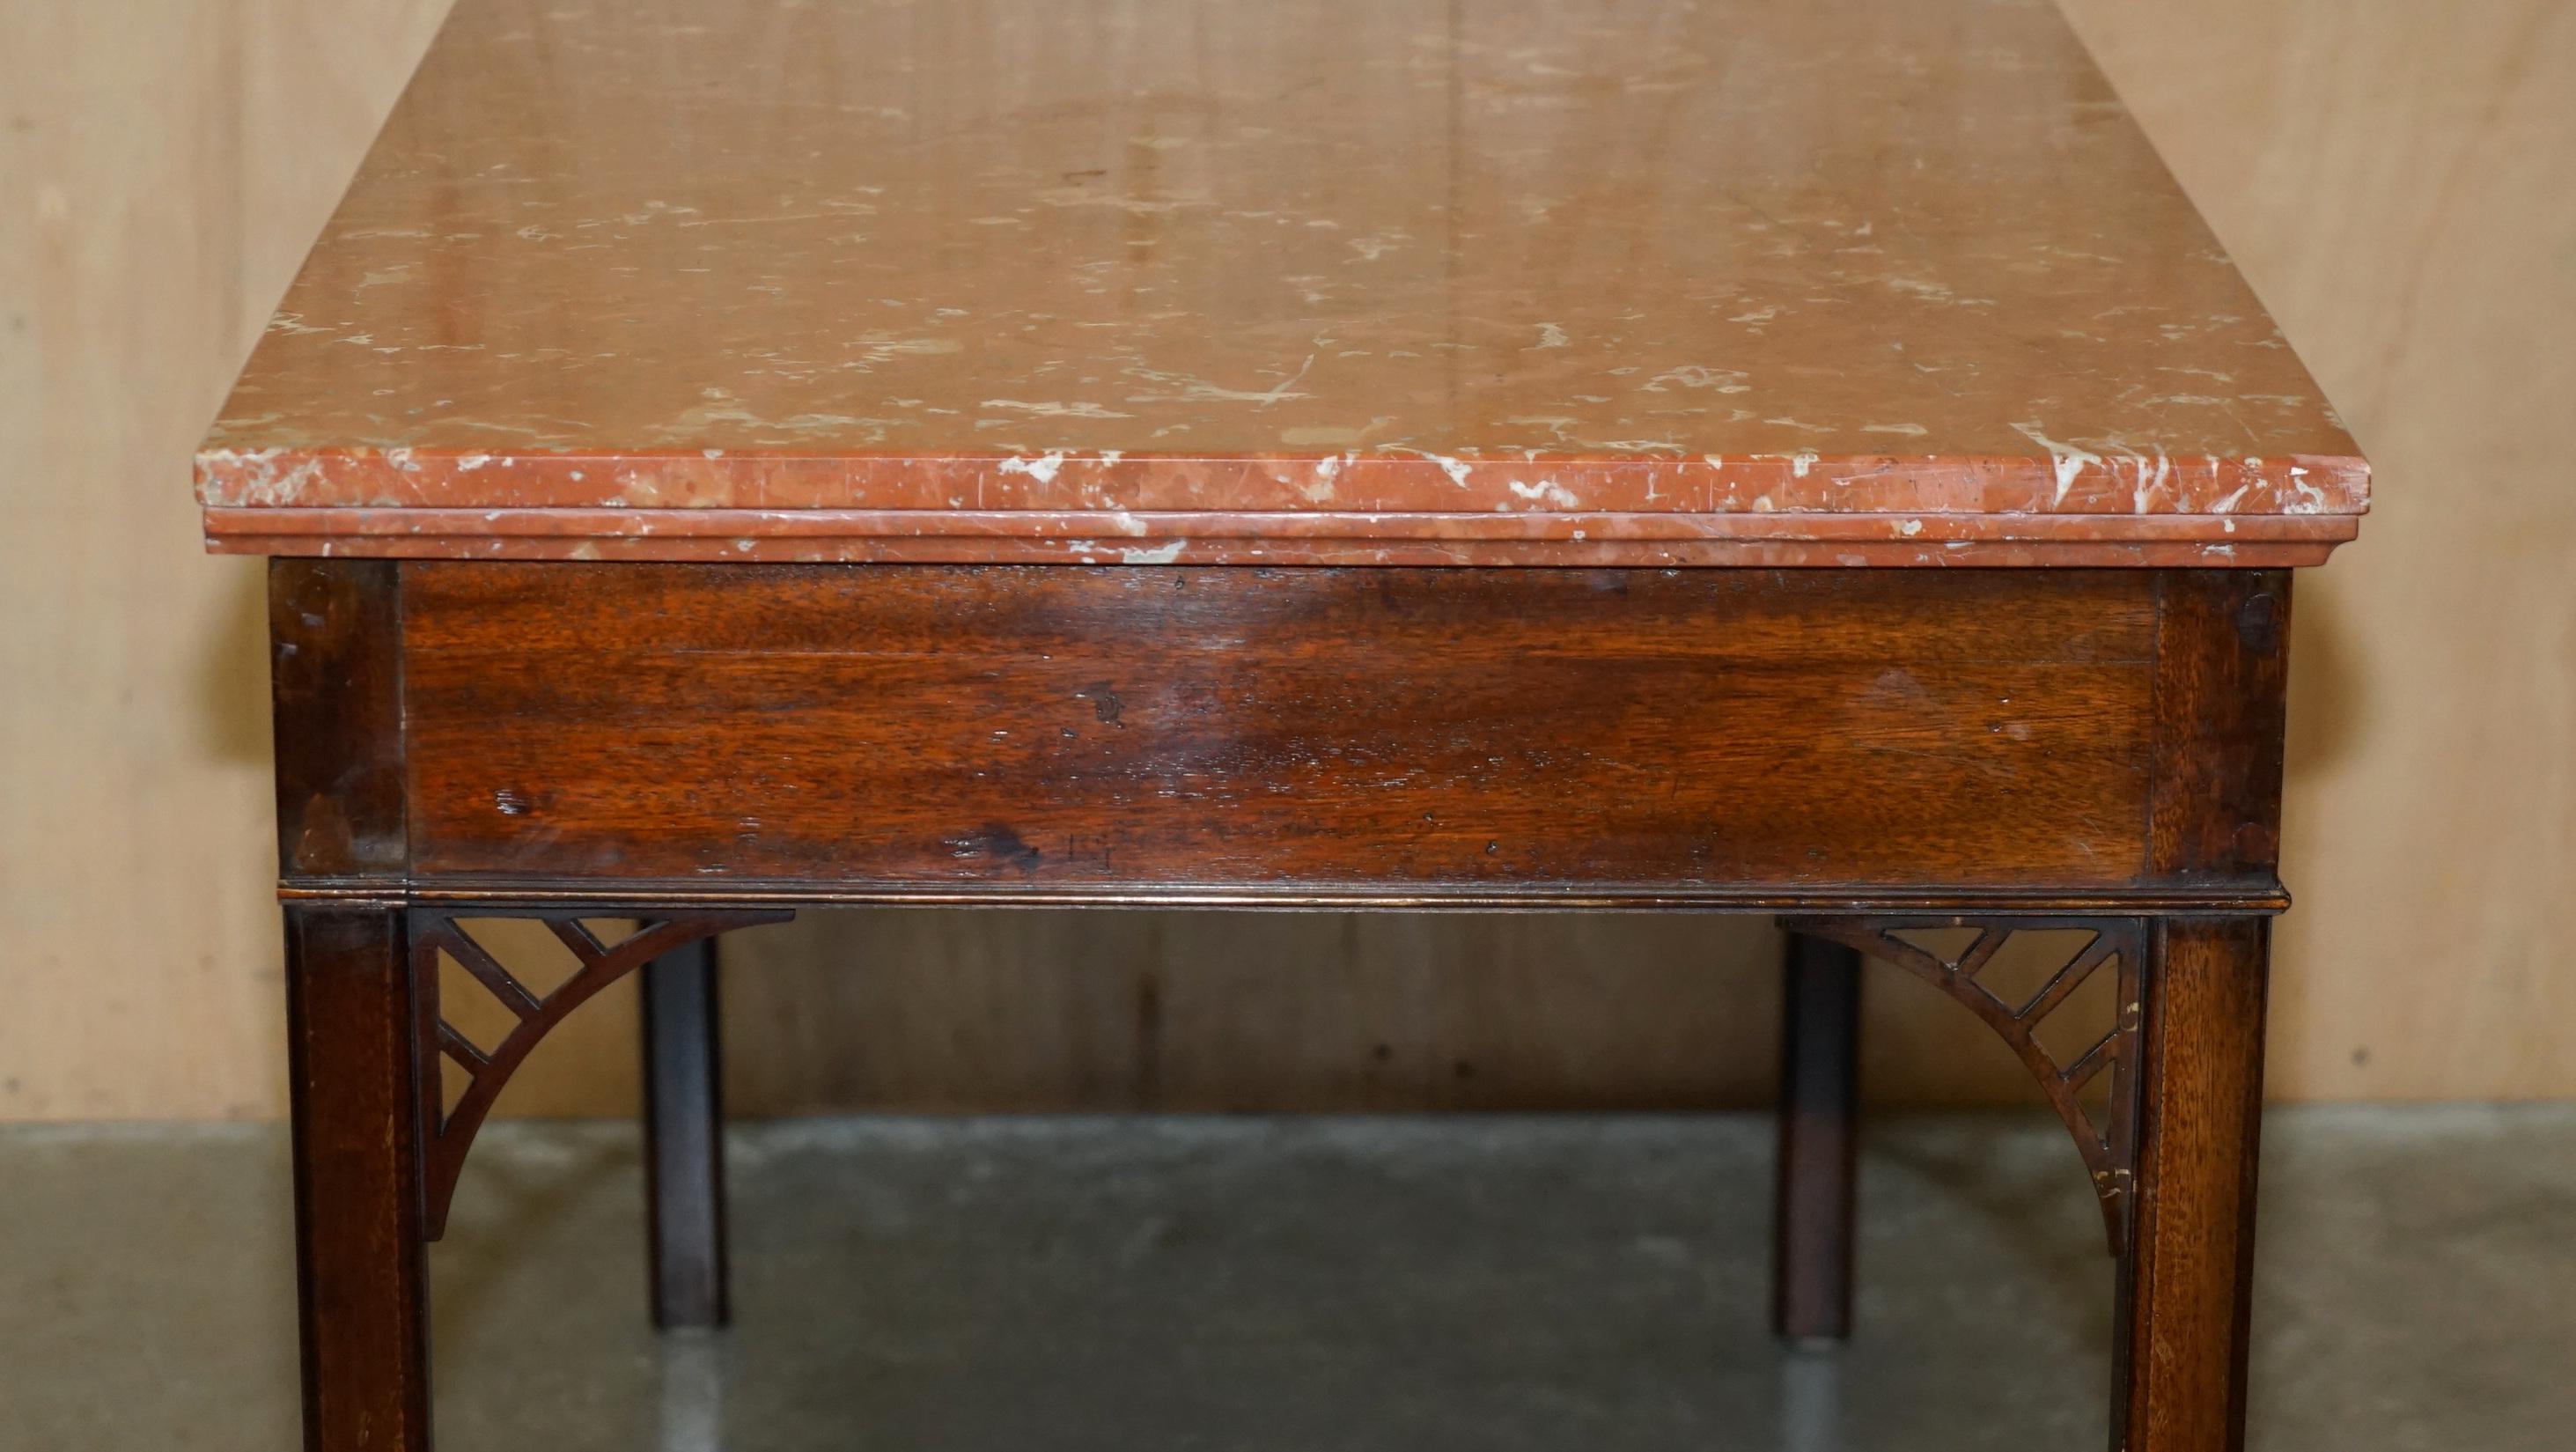 ANTIQUE CIRCA 1860 LARGE THOMAS CHIPPENDALE MARBLE TOP WRiTING OR HALL TABLE im Angebot 8